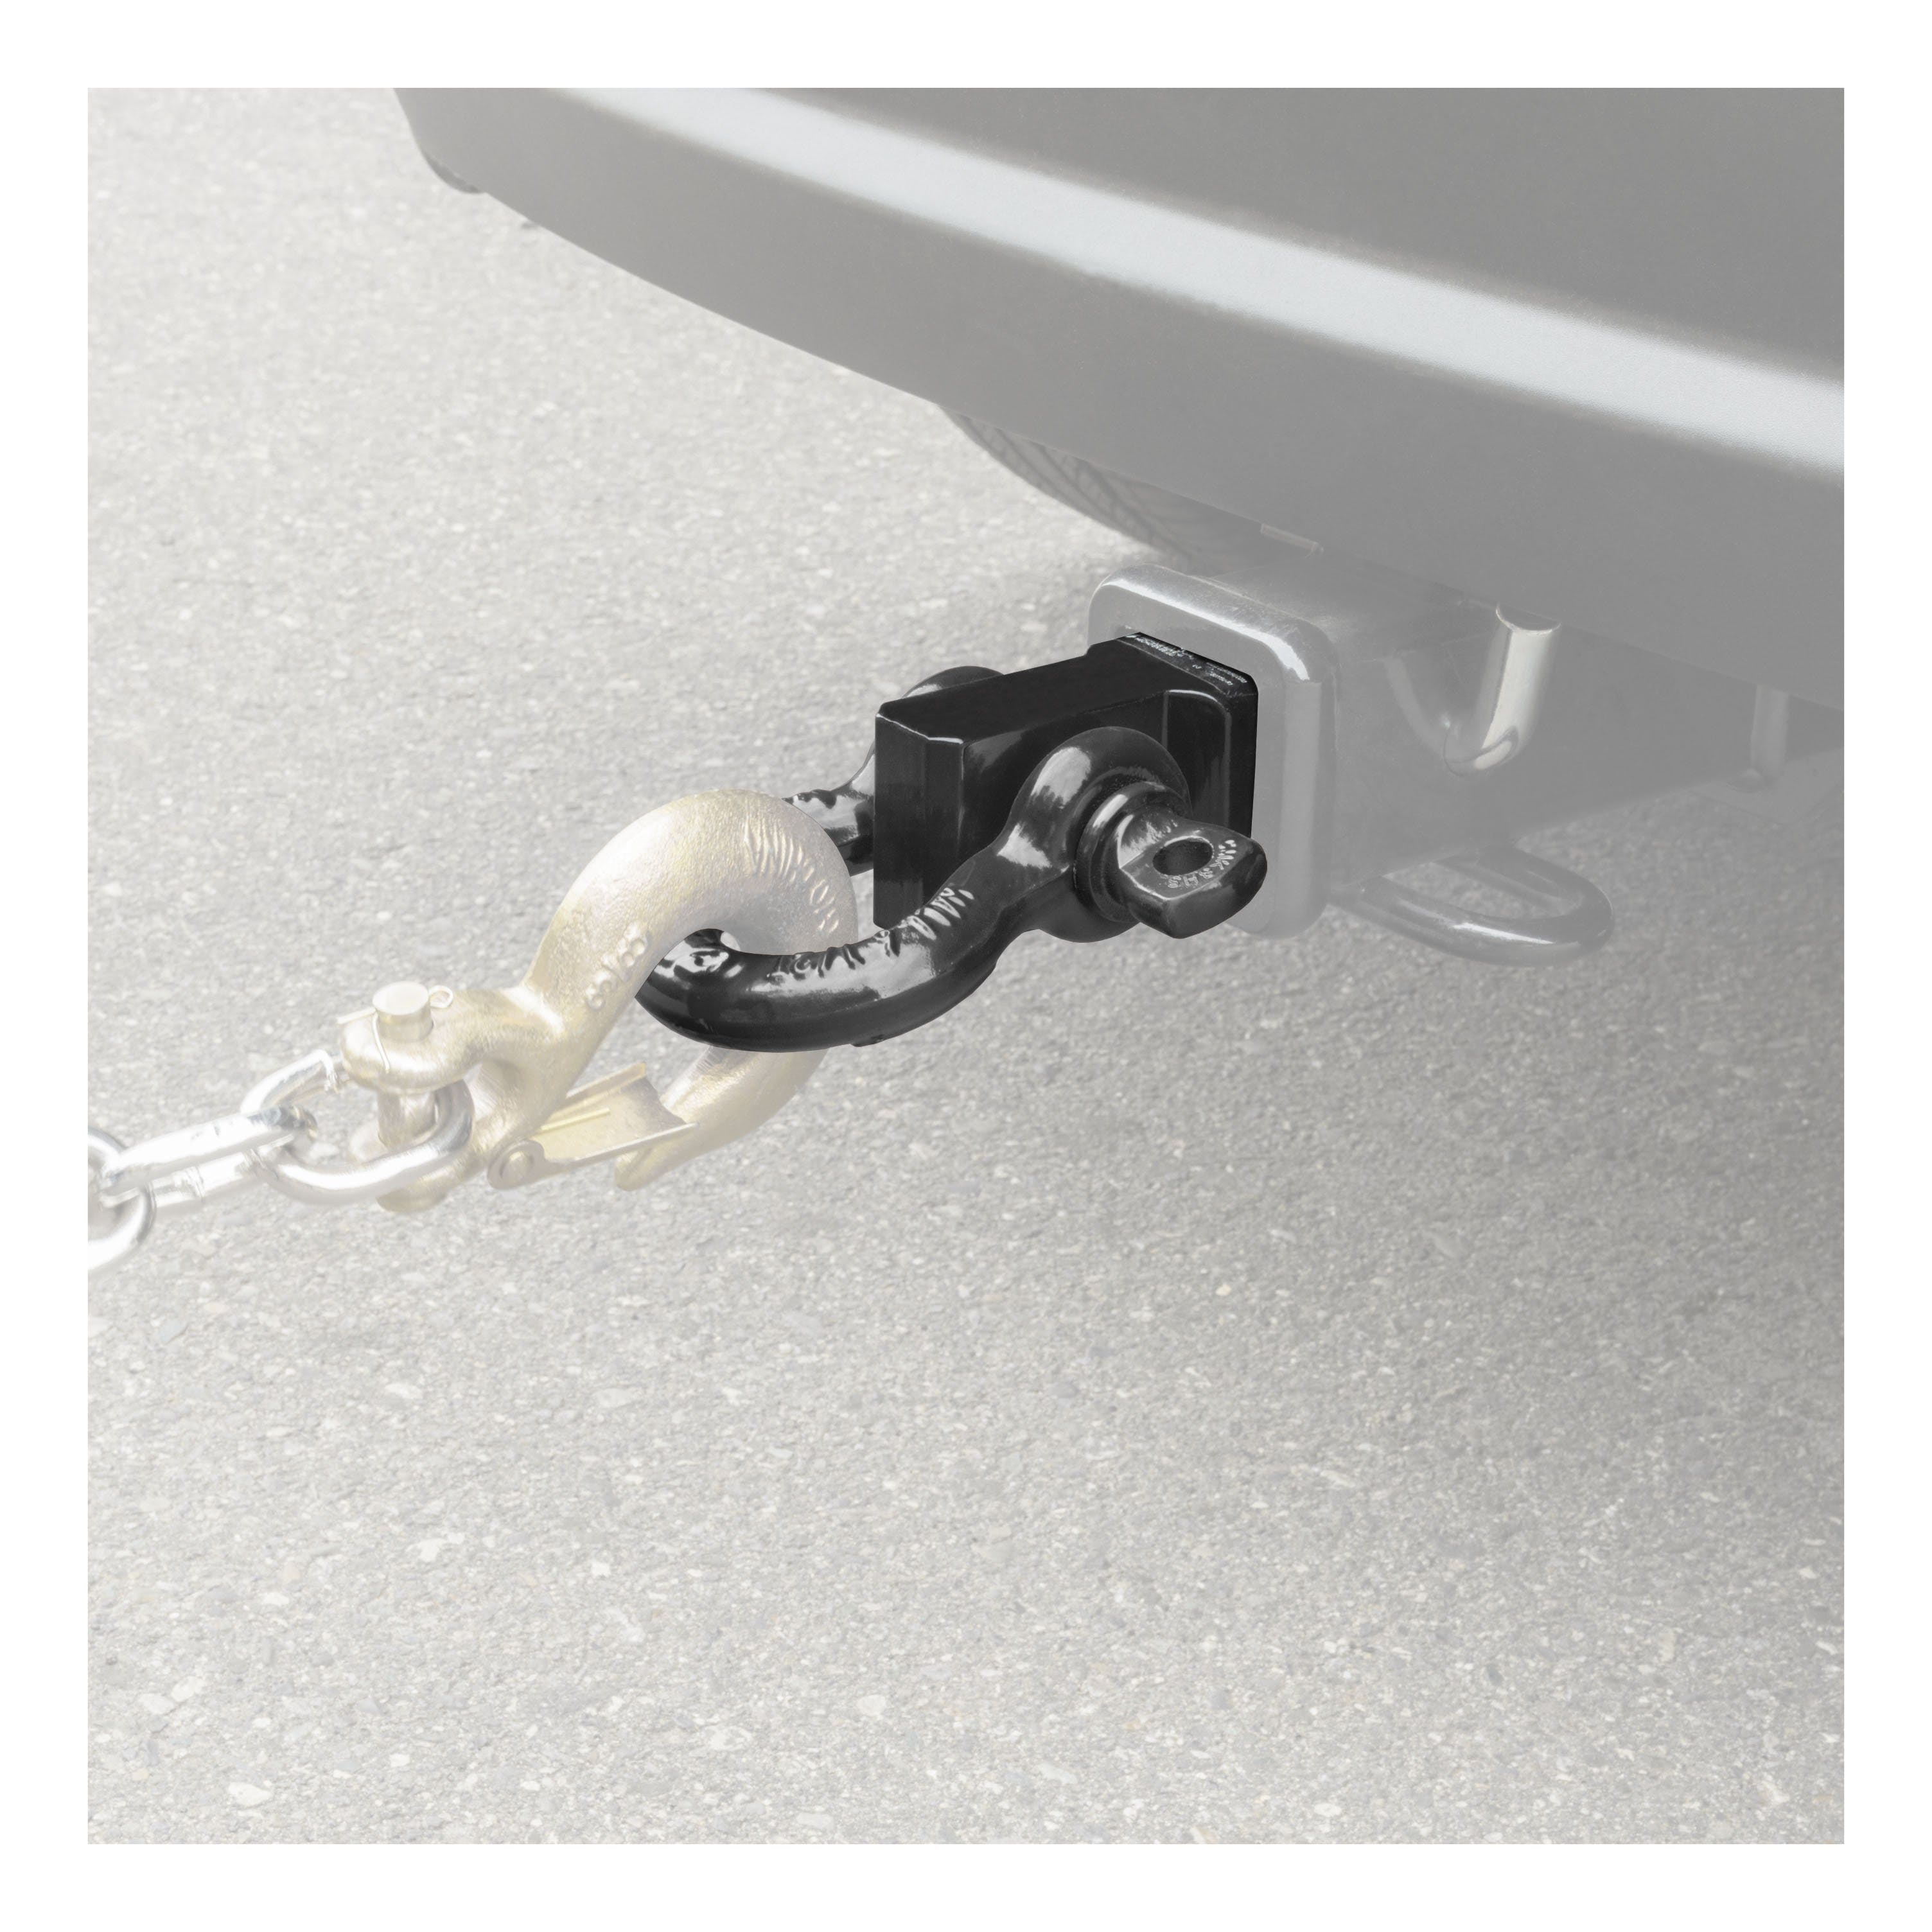 CURT 45832 D-Ring Shackle Mount (2 Shank)